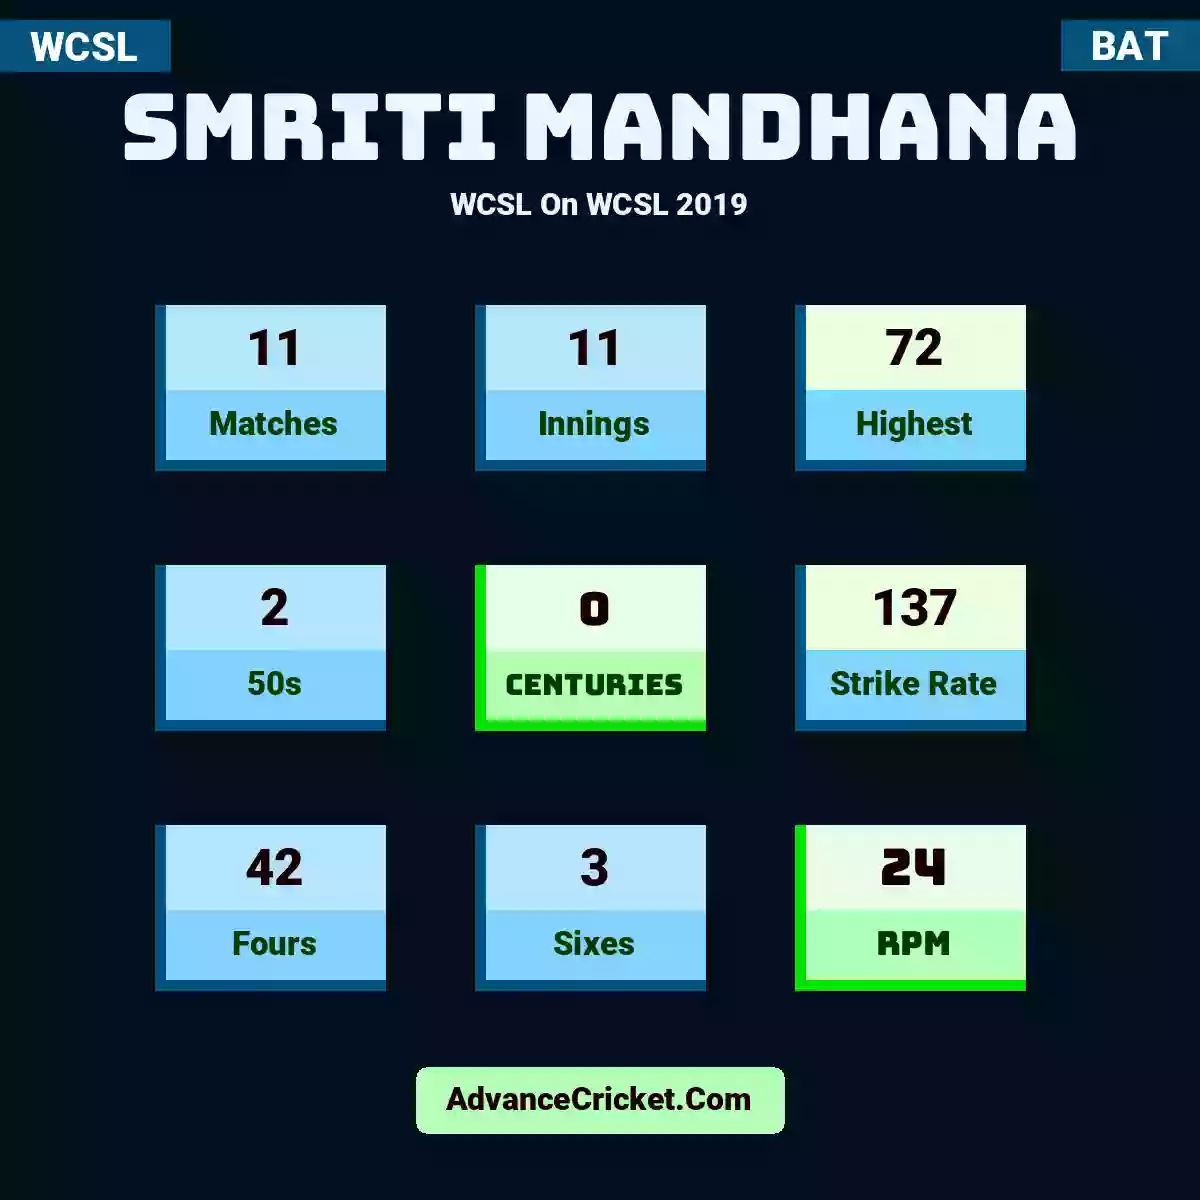 Smriti Mandhana WCSL  On WCSL 2019, Smriti Mandhana played 11 matches, scored 72 runs as highest, 2 half-centuries, and 0 centuries, with a strike rate of 137. S.Mandhana hit 42 fours and 3 sixes, with an RPM of 24.